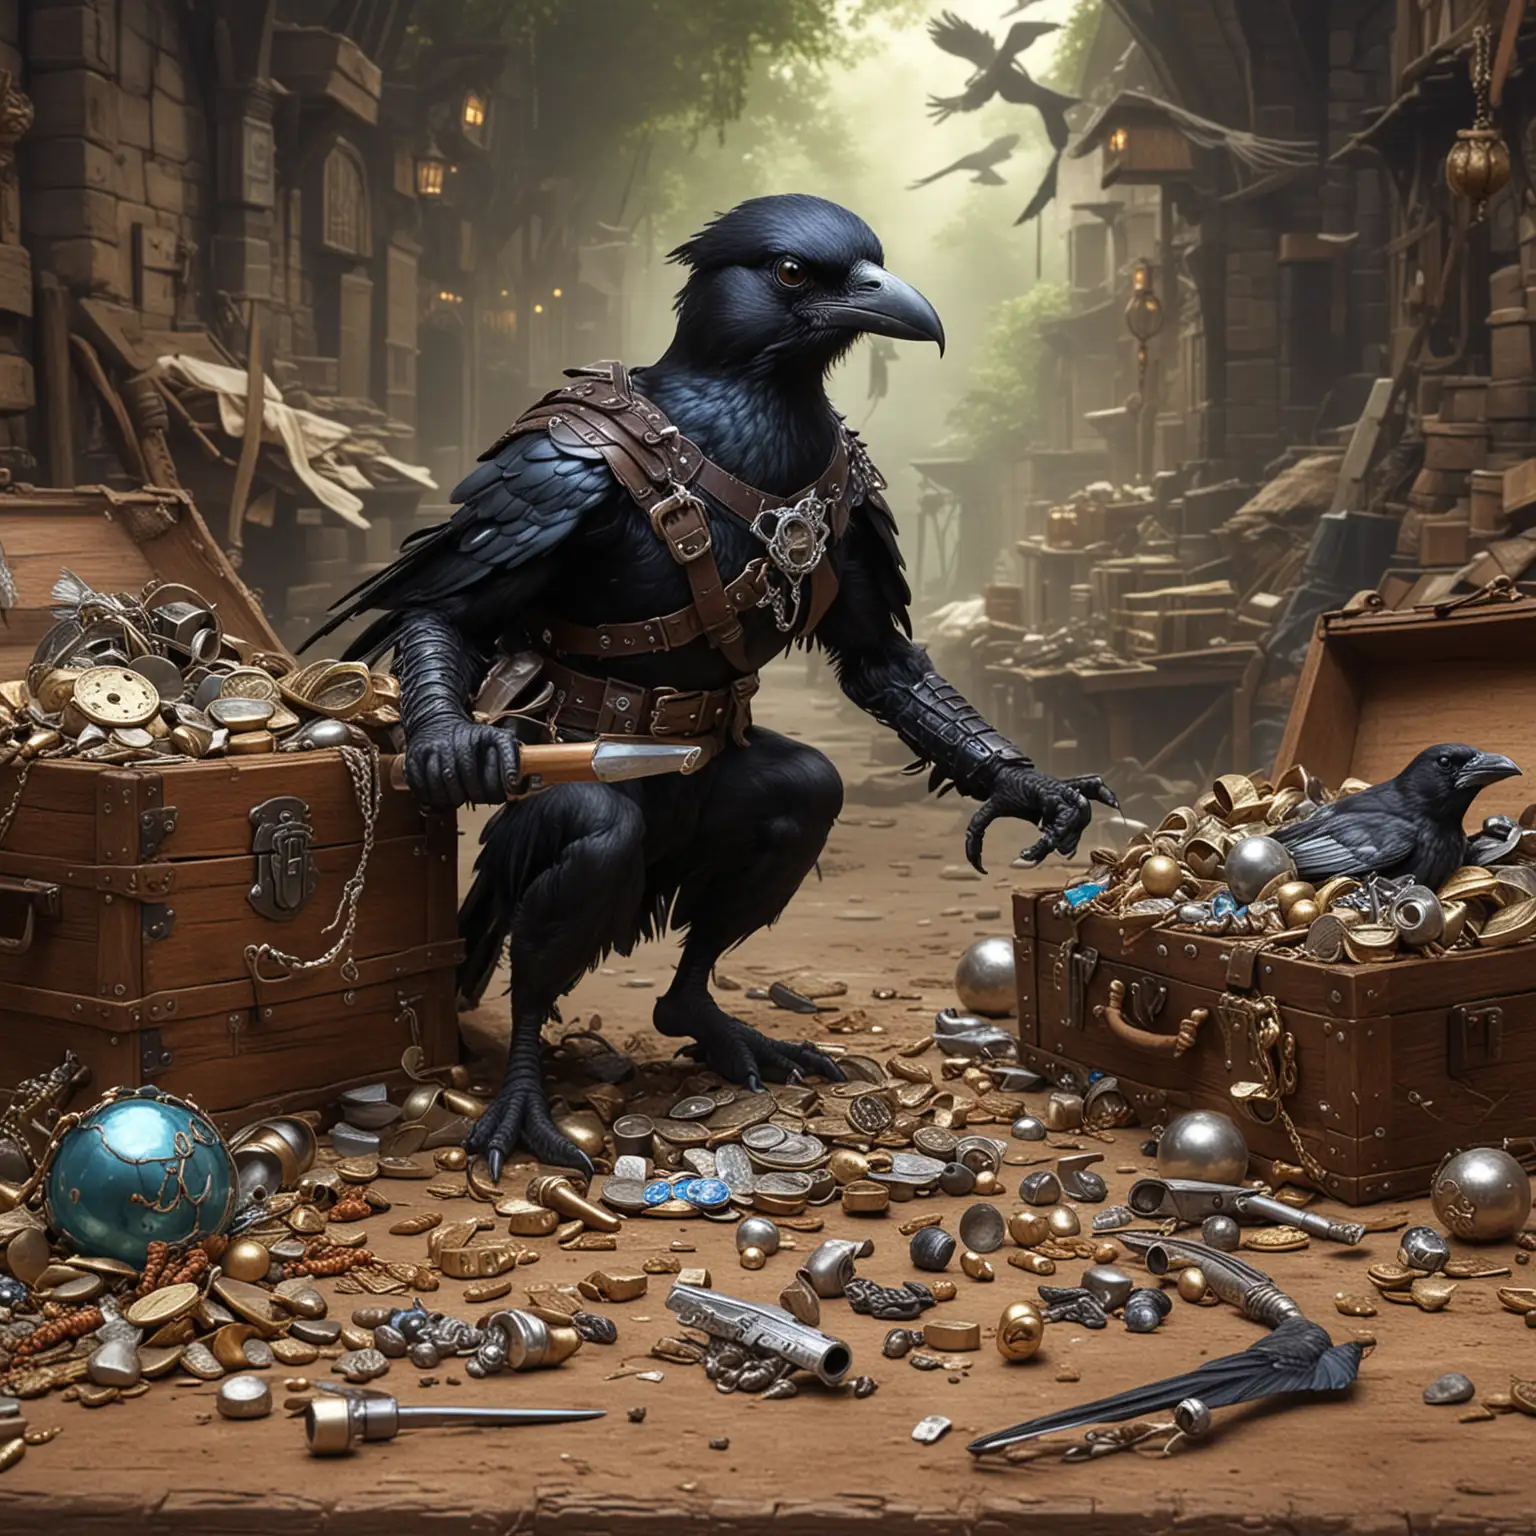 Mischievous Humanoid Magpie Stealing from a Treasure Trove